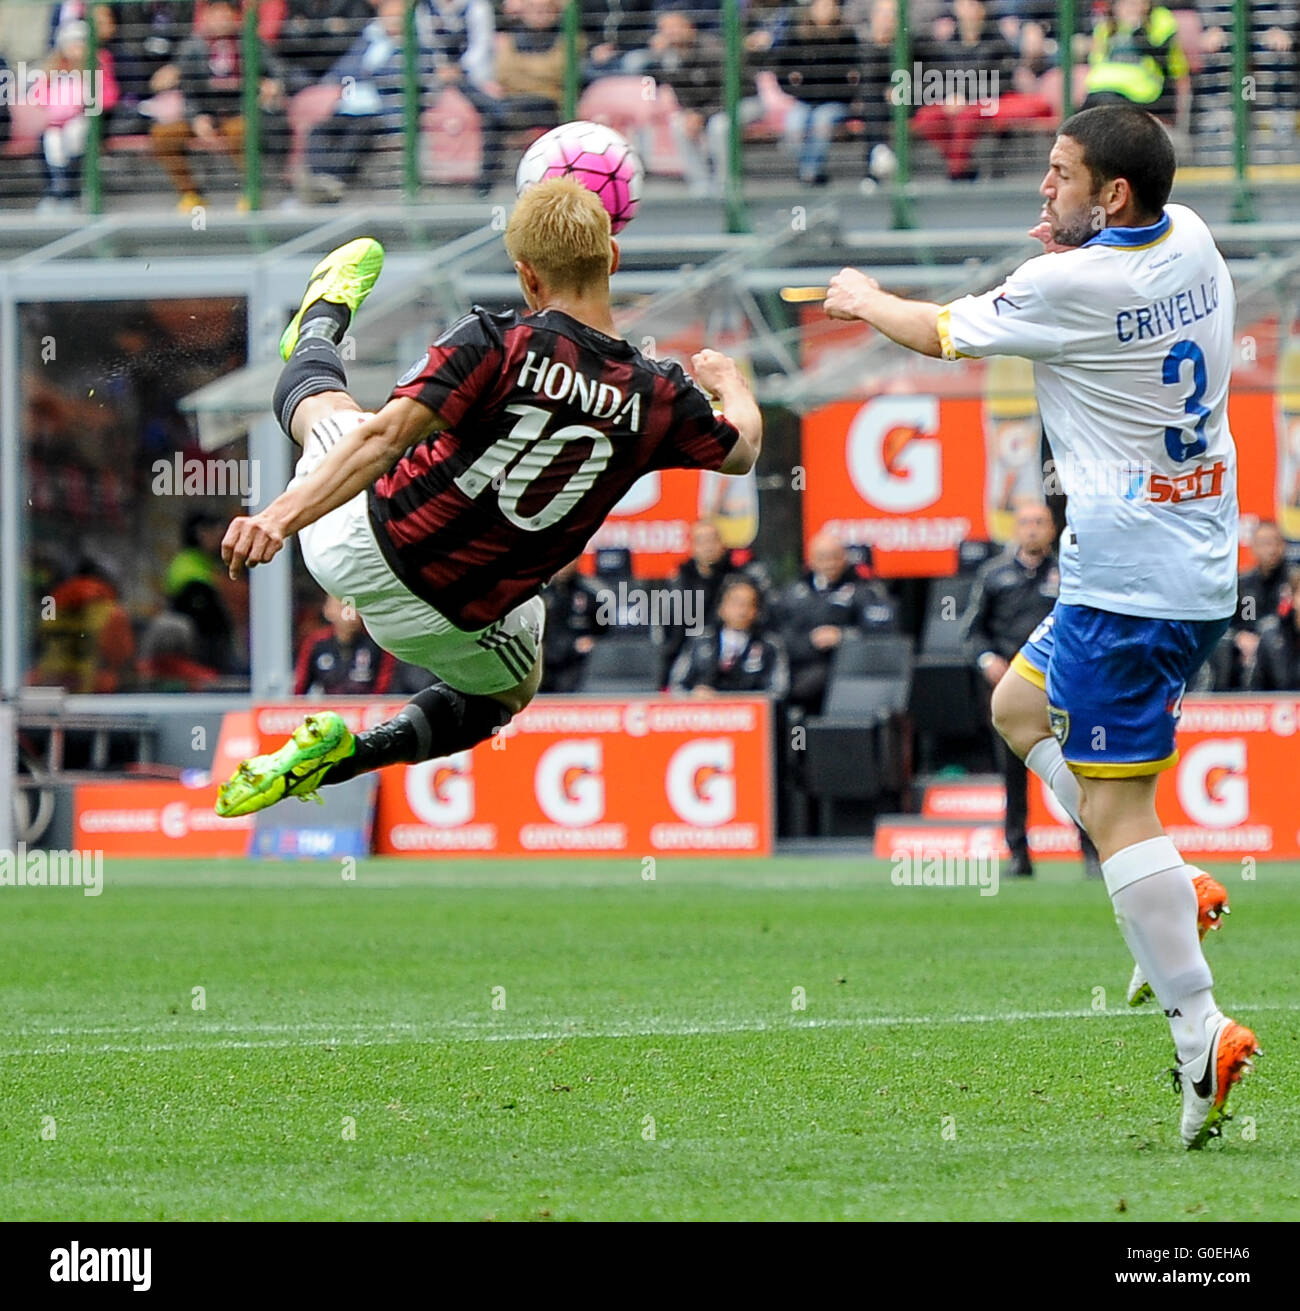 Milan, Italy. 1 may, 2016: Bicycle kick by Keisuke Honda during the Serie A football match between AC Milan and Frosinone Calcio Credit:  Nicolò Campo/Alamy Live News Stock Photo